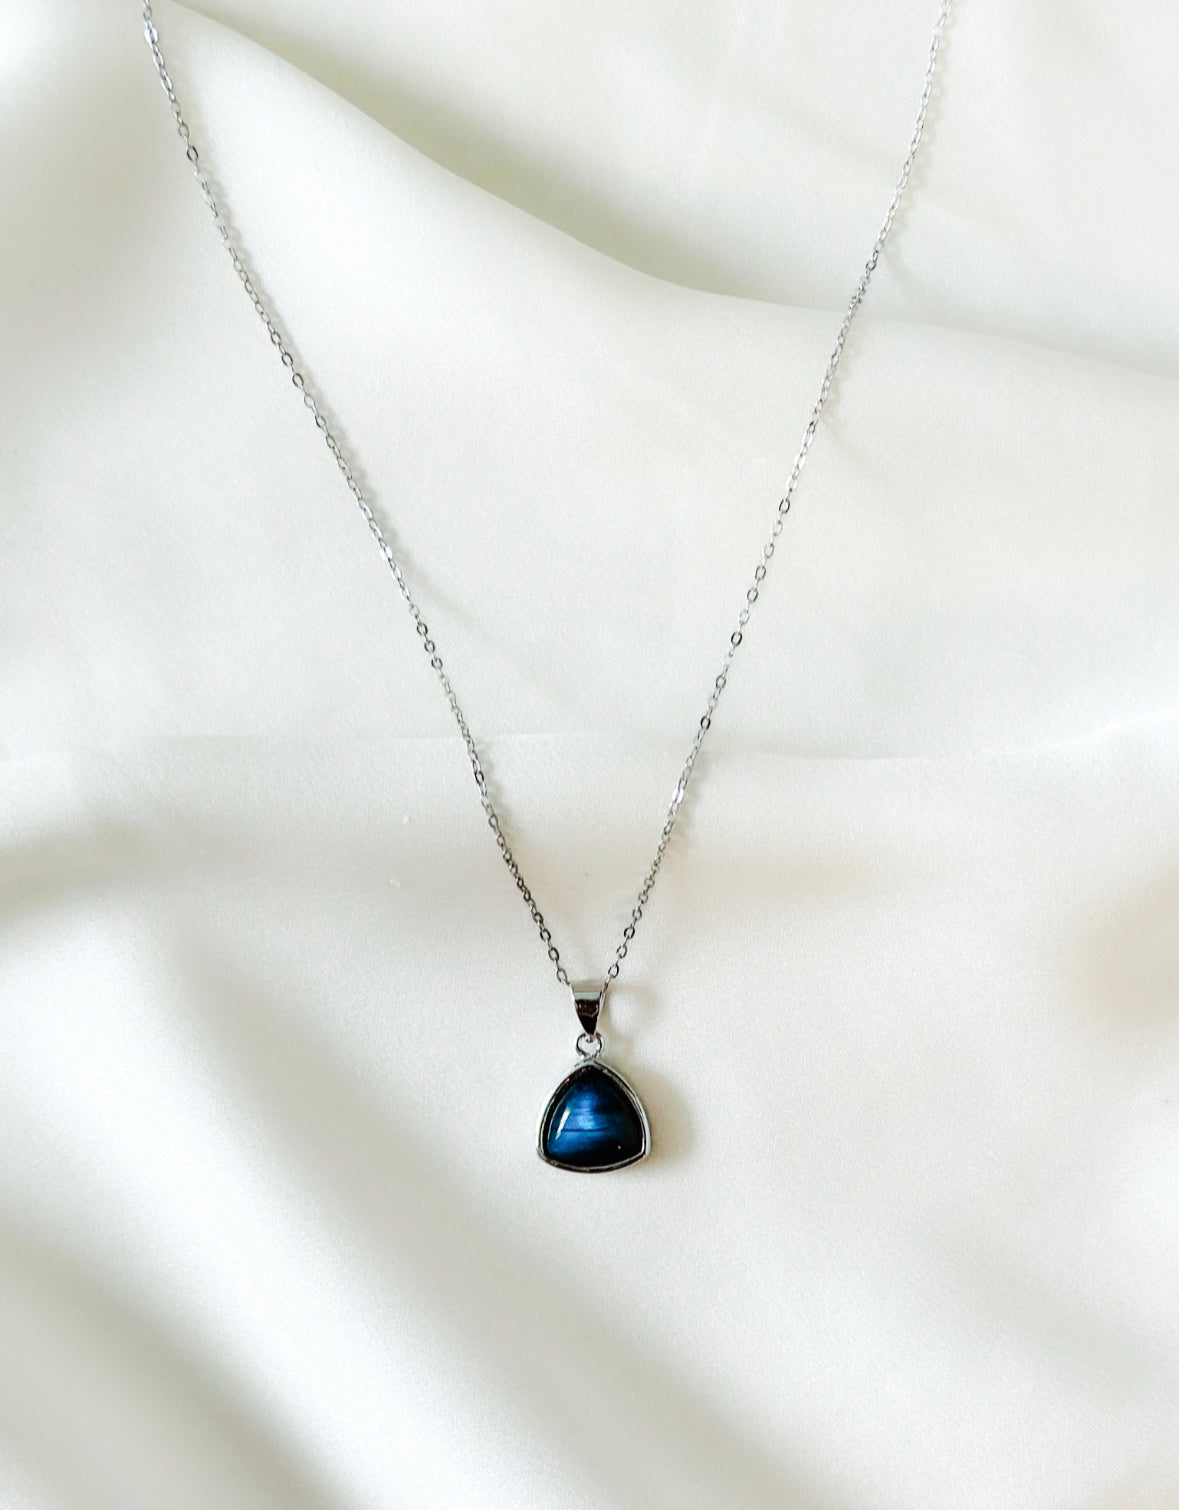 sterling silver necklace adorned with a captivating Labradorite charm.